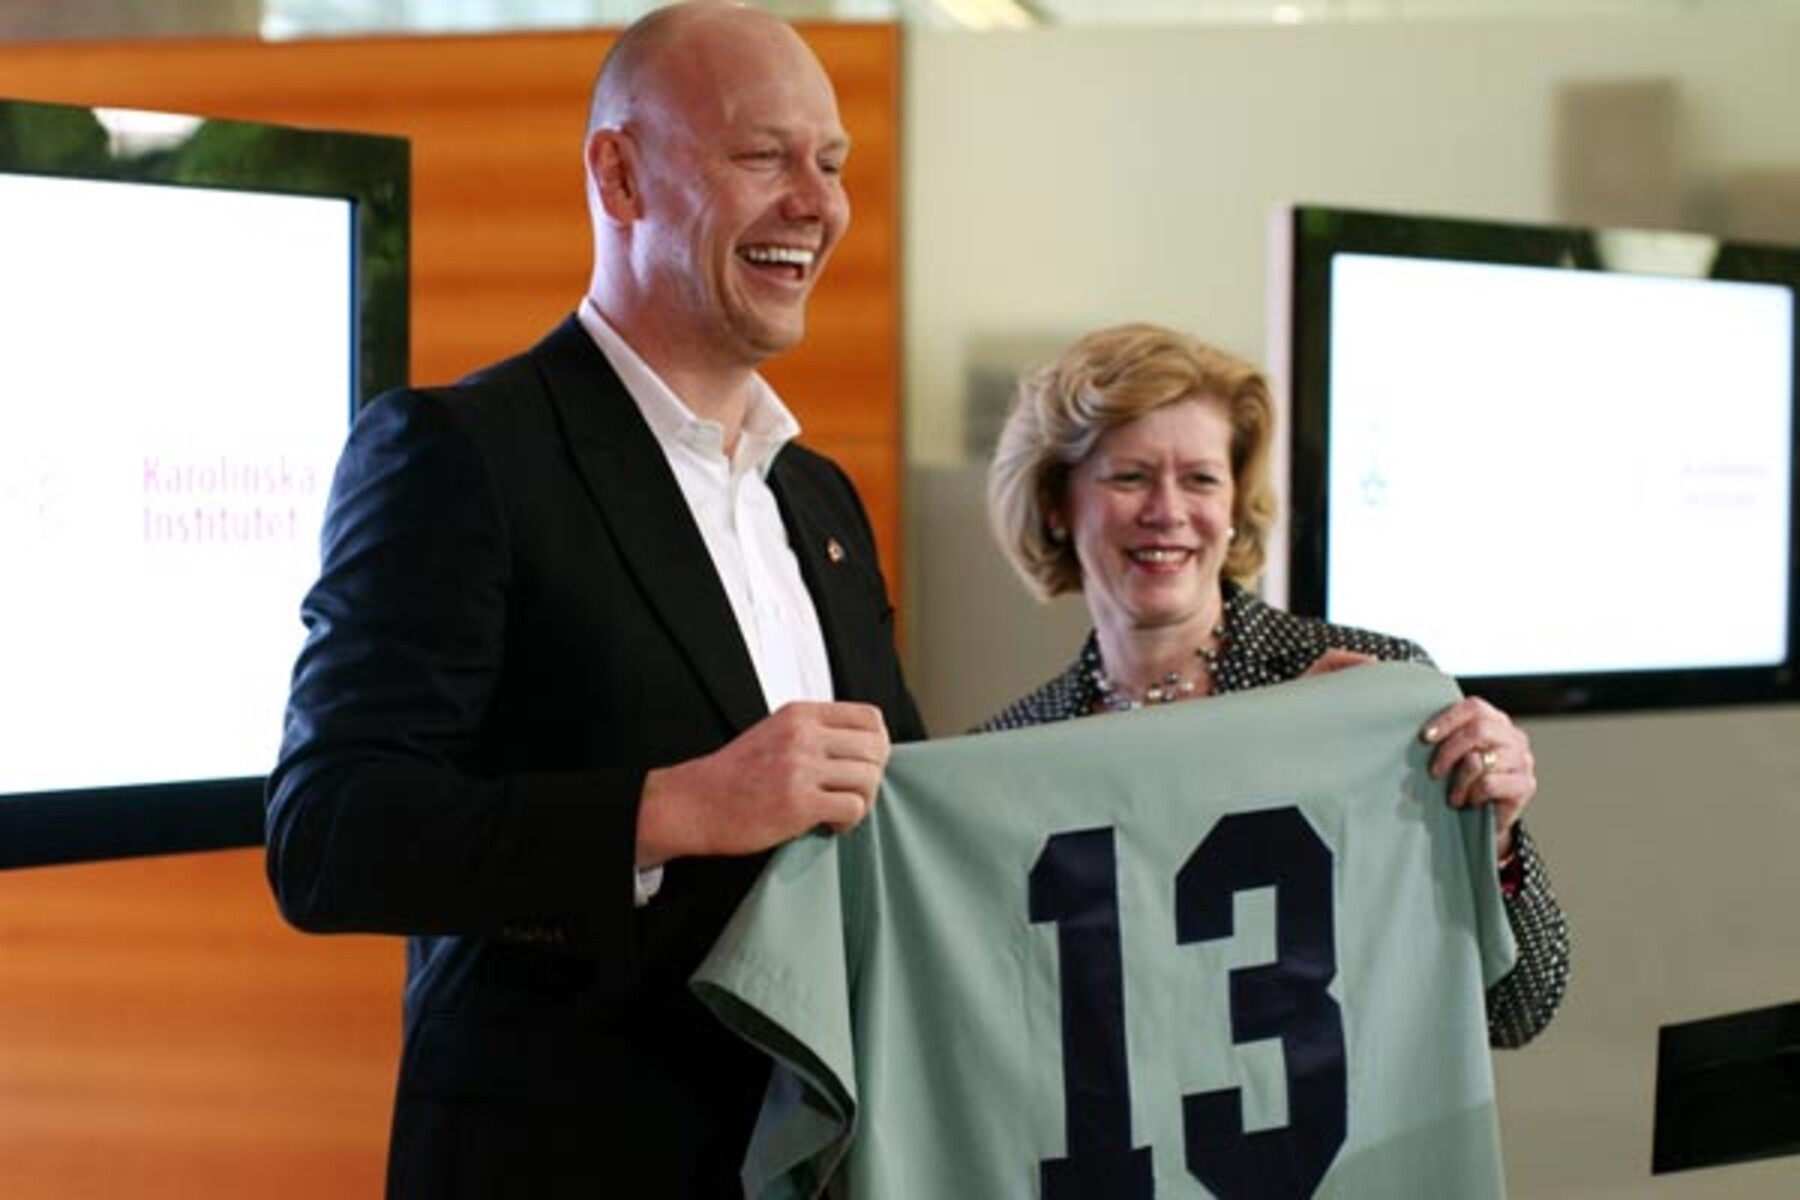 Former Toronto Maple Leafs captain Mats Sundin beams as he and Dean Cathy Whiteside display the U of T Faculty of Medicine's gift of medical scrubs bearing his iconic No. 13. (Photo by Dave Chan)